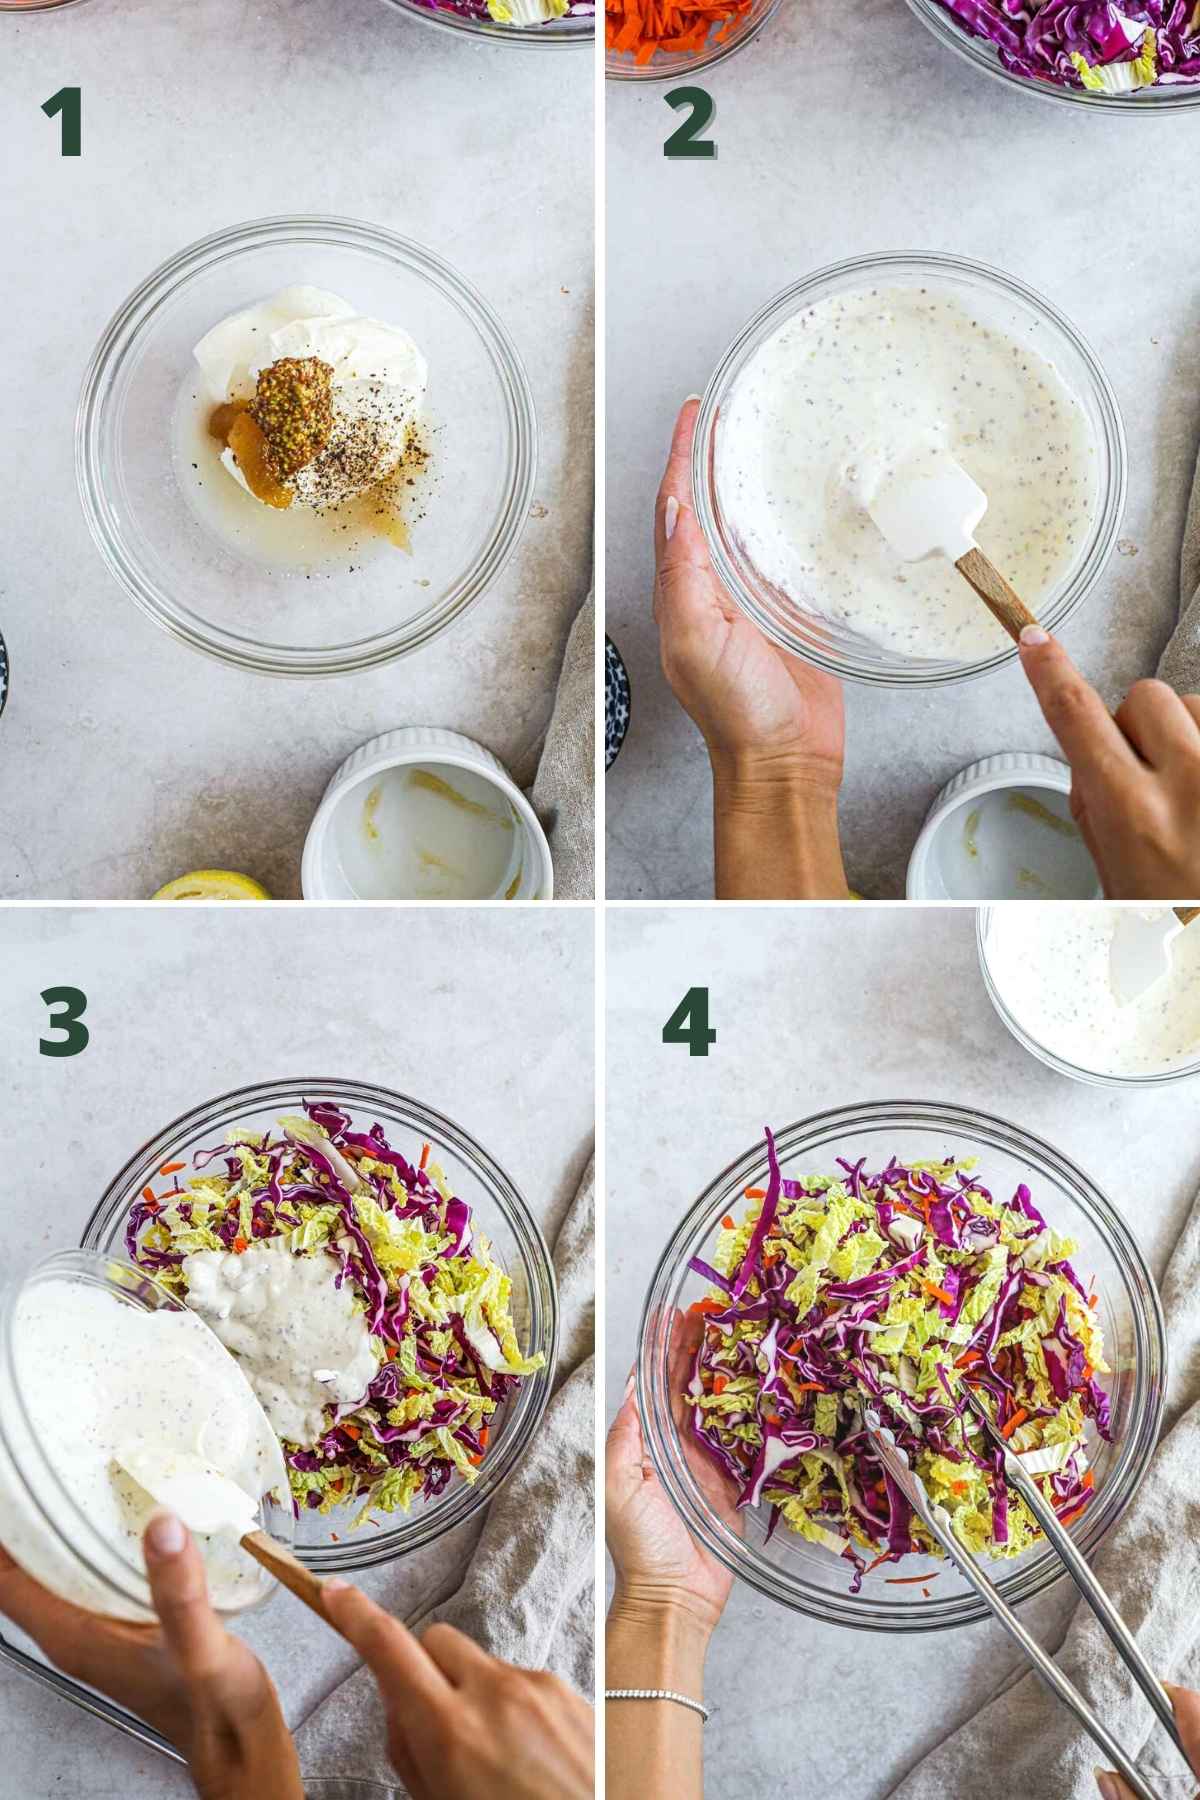 Steps to make healthy Greek yogurt coleslaw, including making the honey yogurt sauce, pouring the sauce on the shredded cabbage, and mixing.